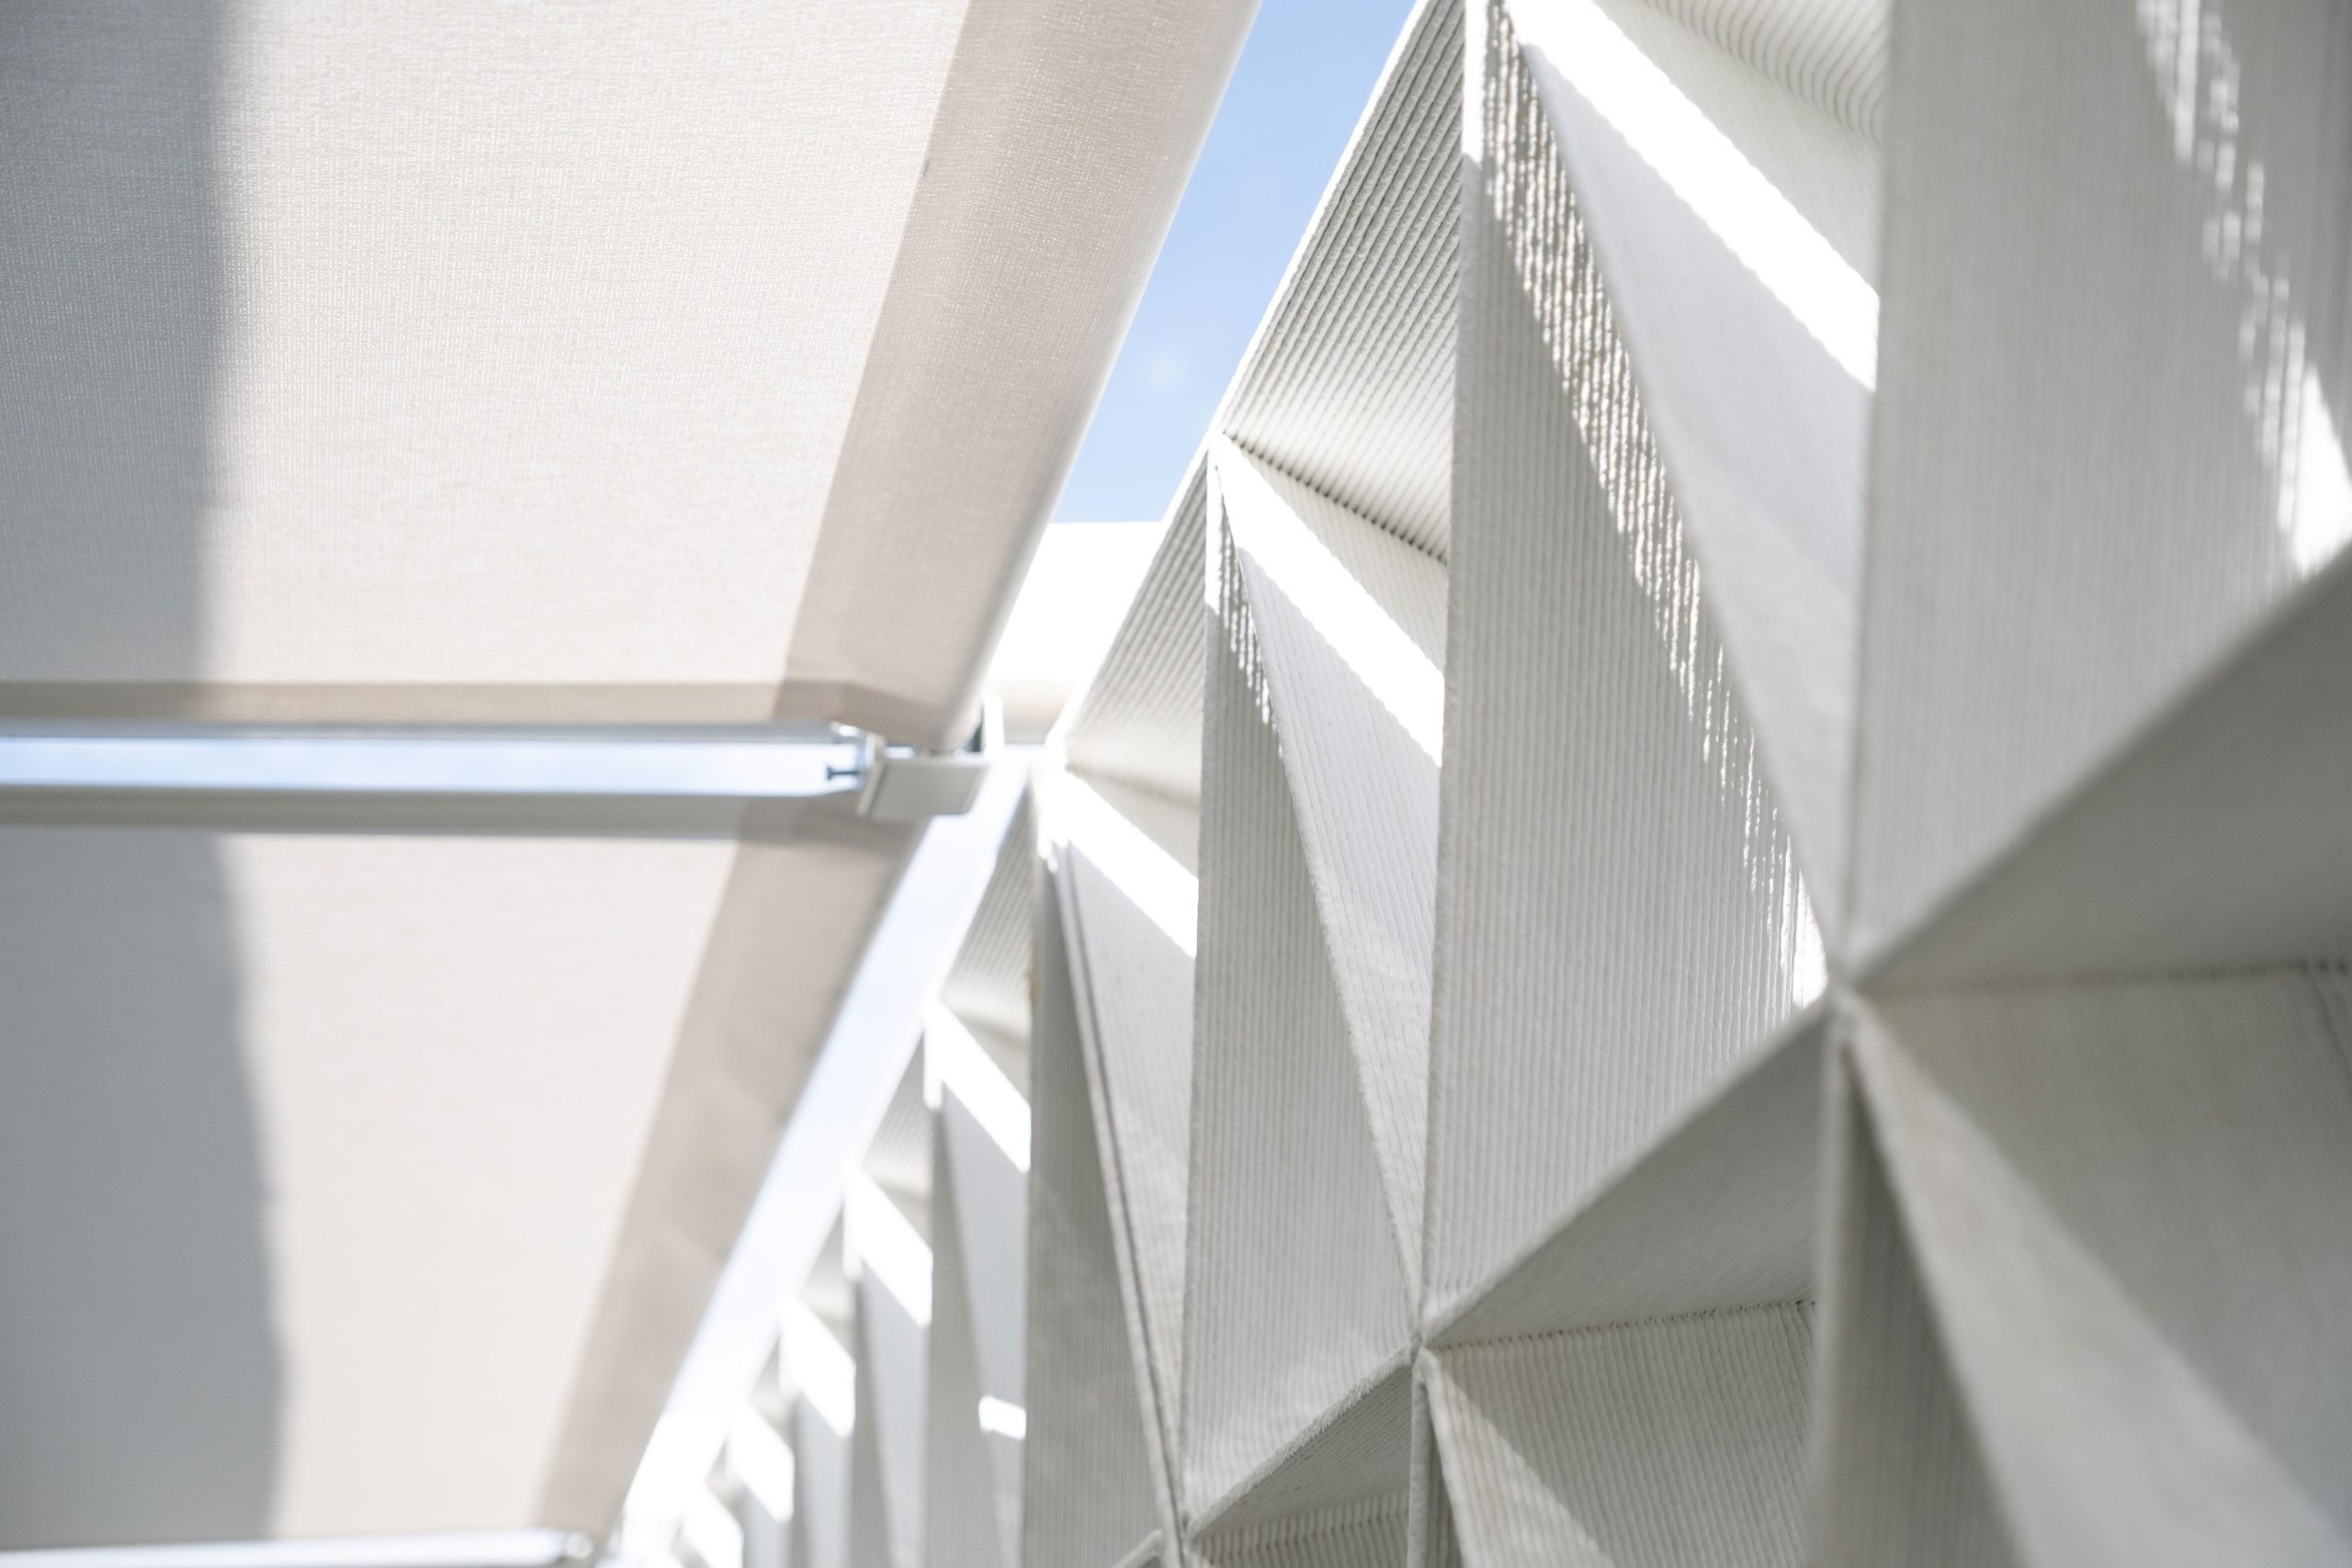 The claustra wall is made up of 3D printed triangles that slot together. Photo via Aectual.